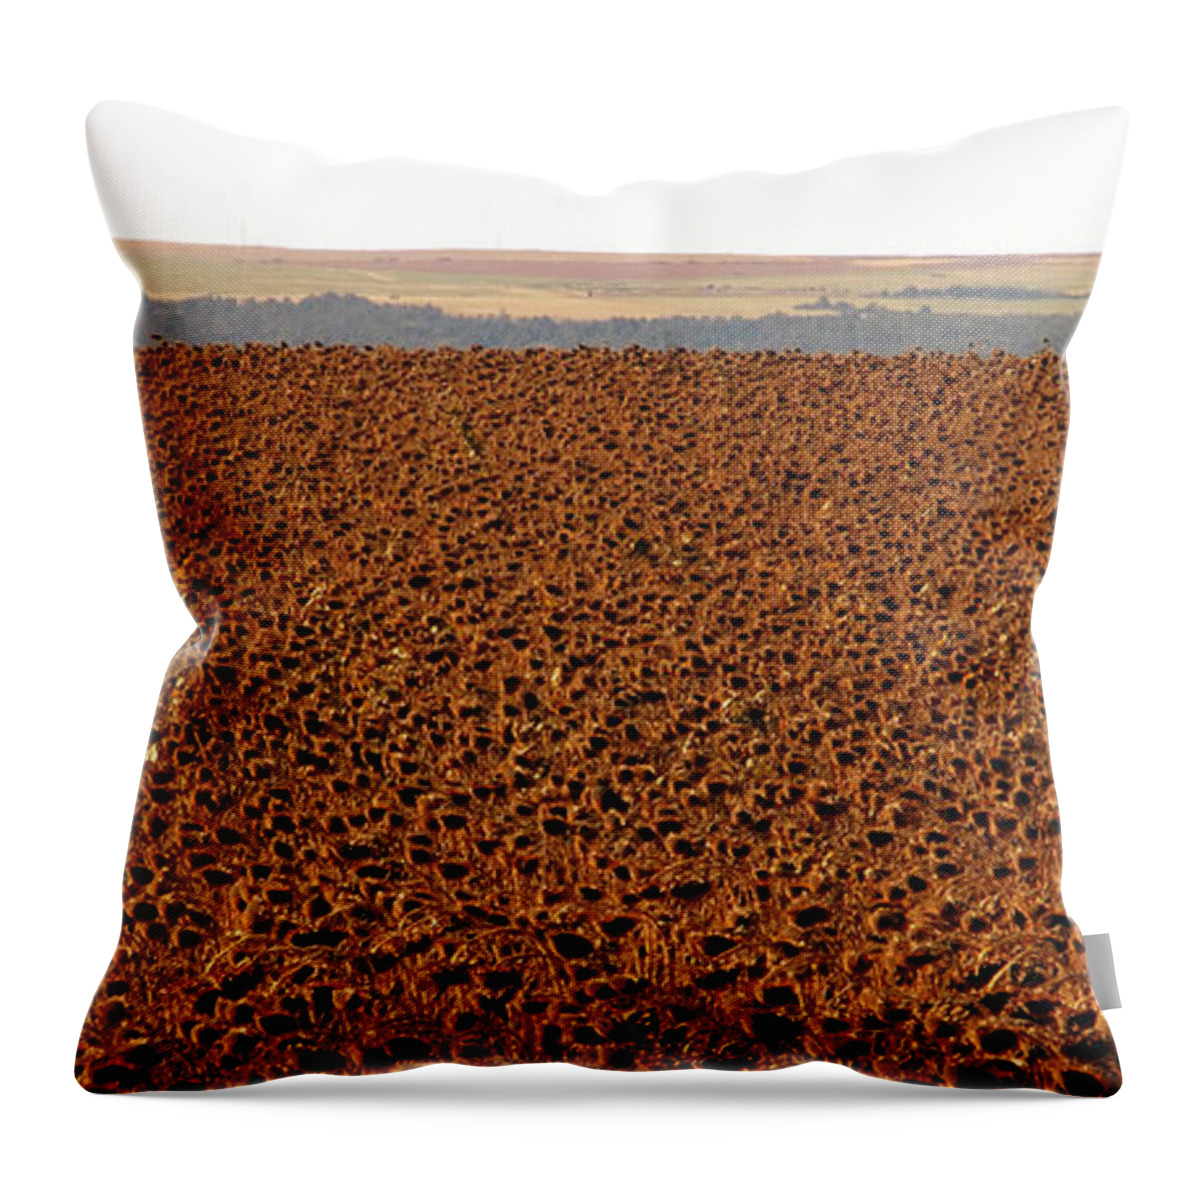 Sunflowers Throw Pillow featuring the photograph Sunflowers ready for harvesting by David Lee Thompson